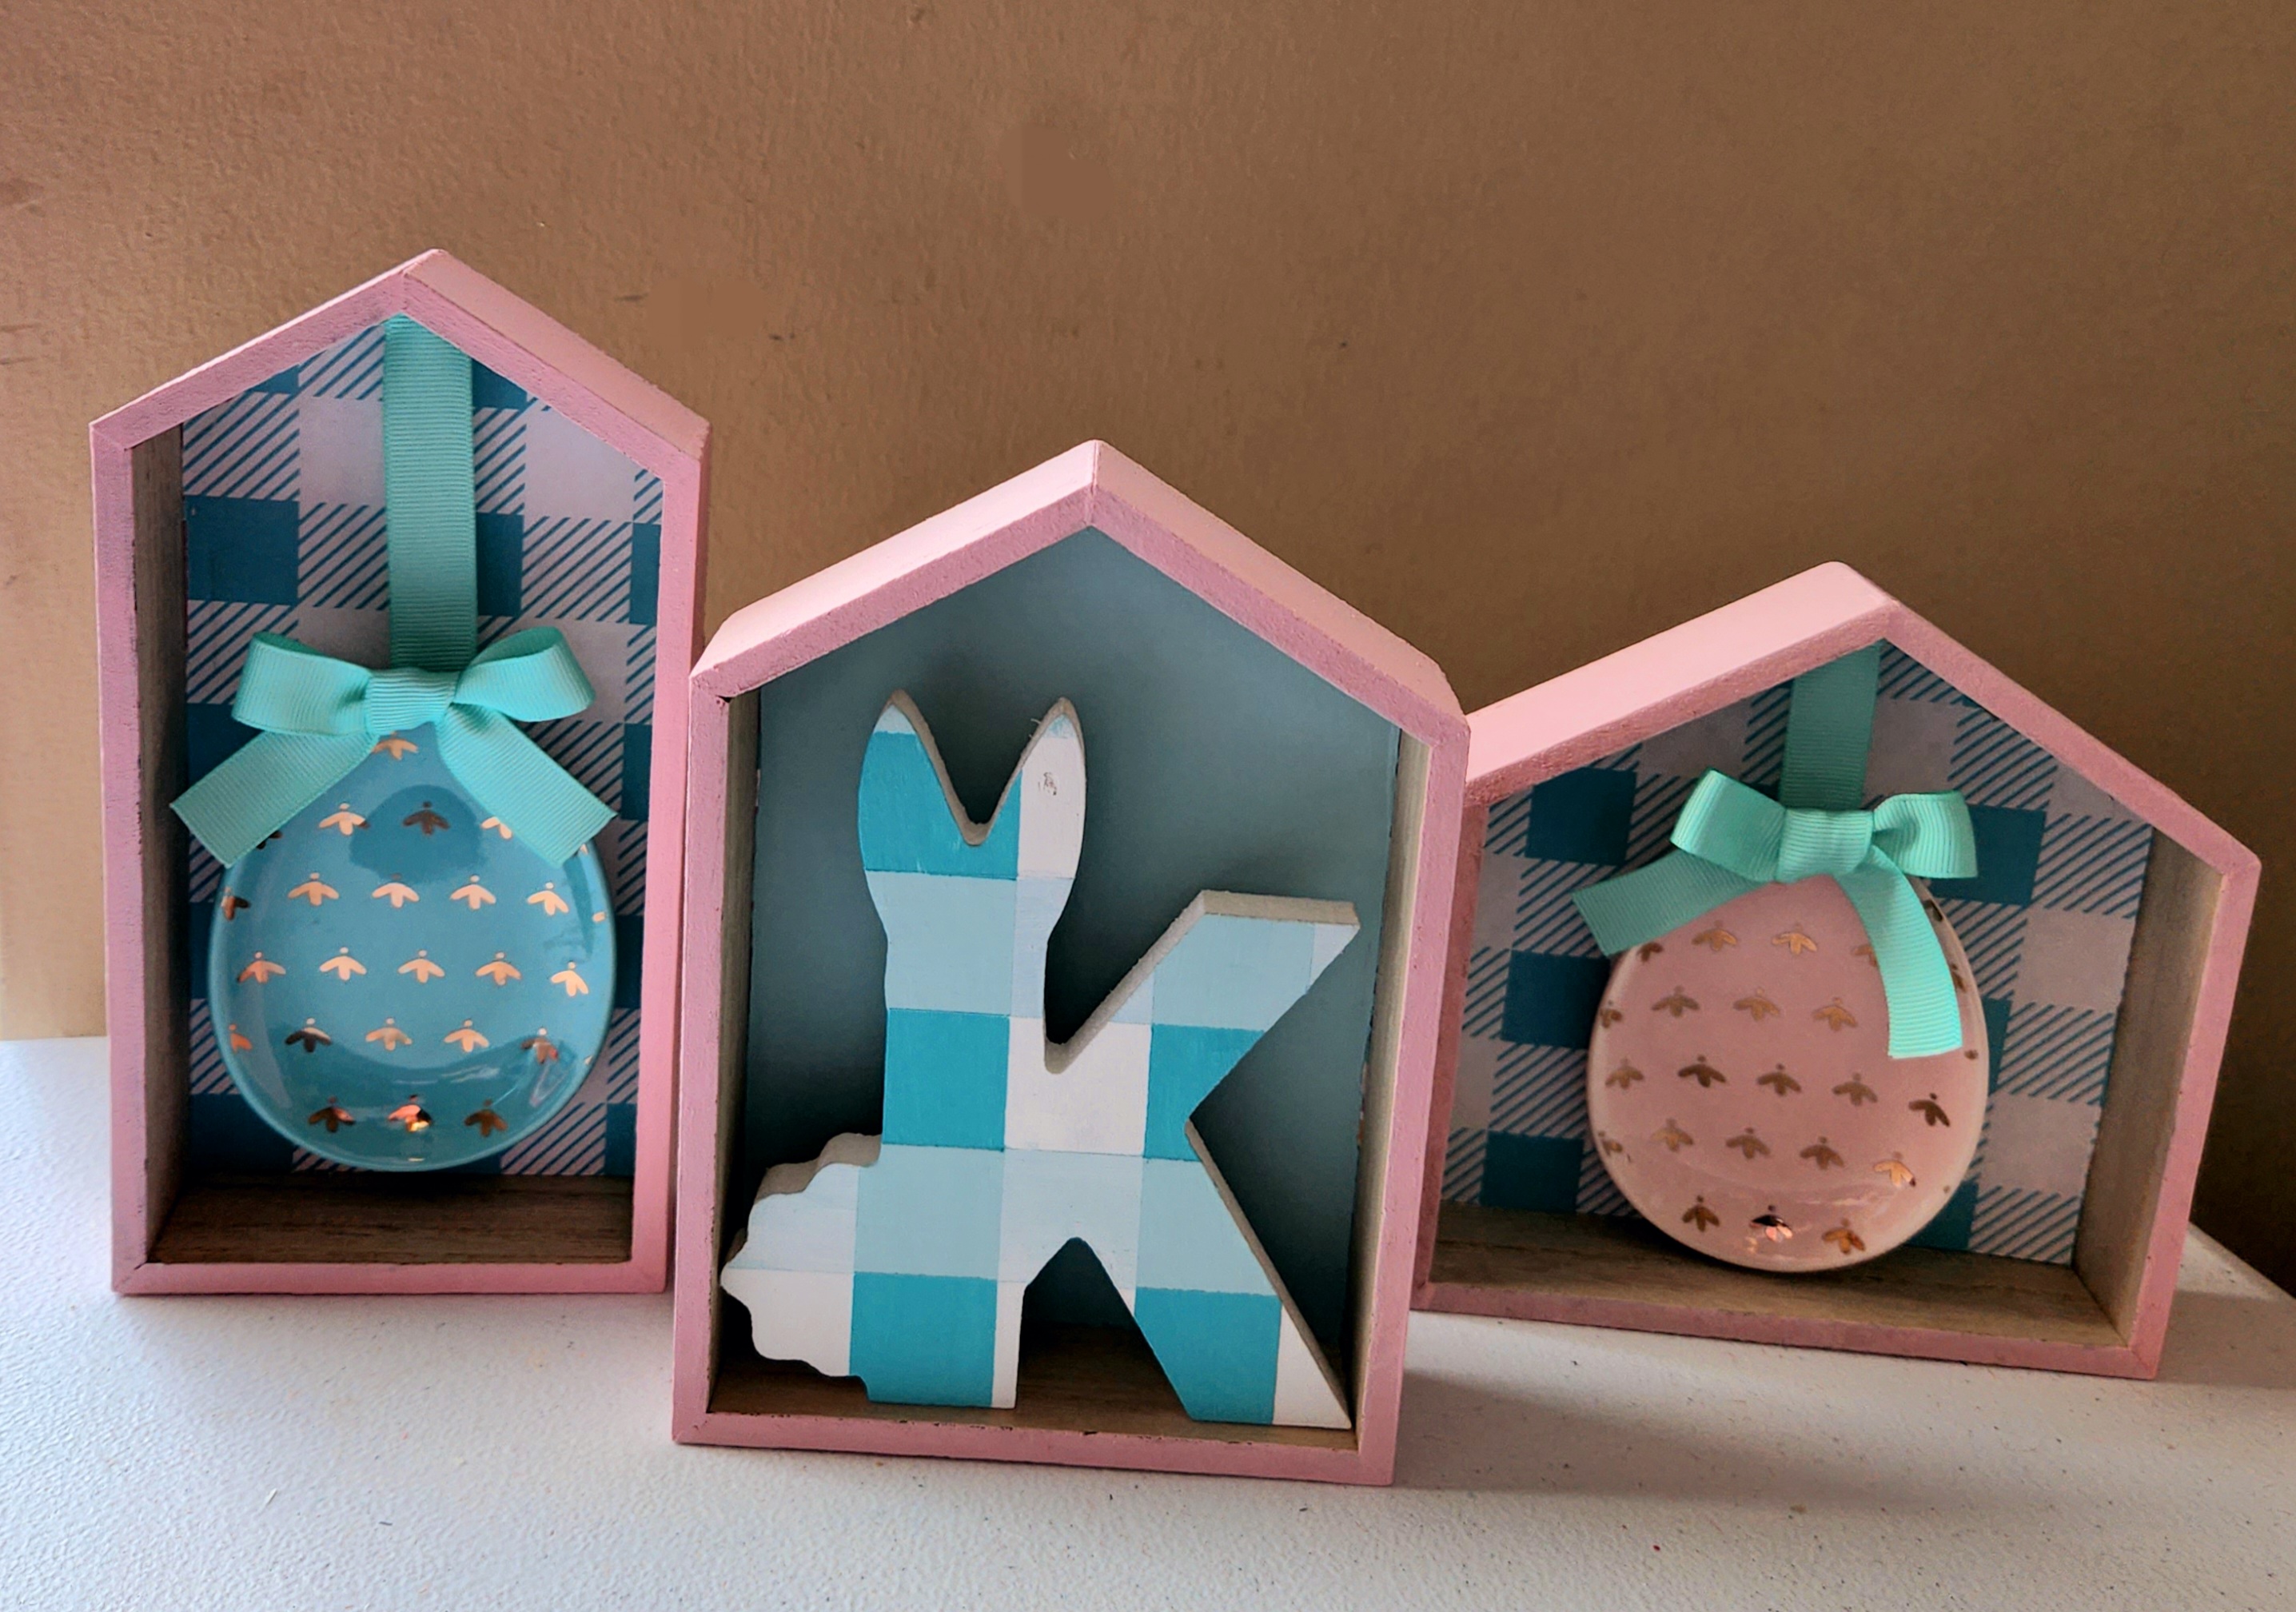 Spring Dollar Tree houses painted pink with spring embellishments inside.